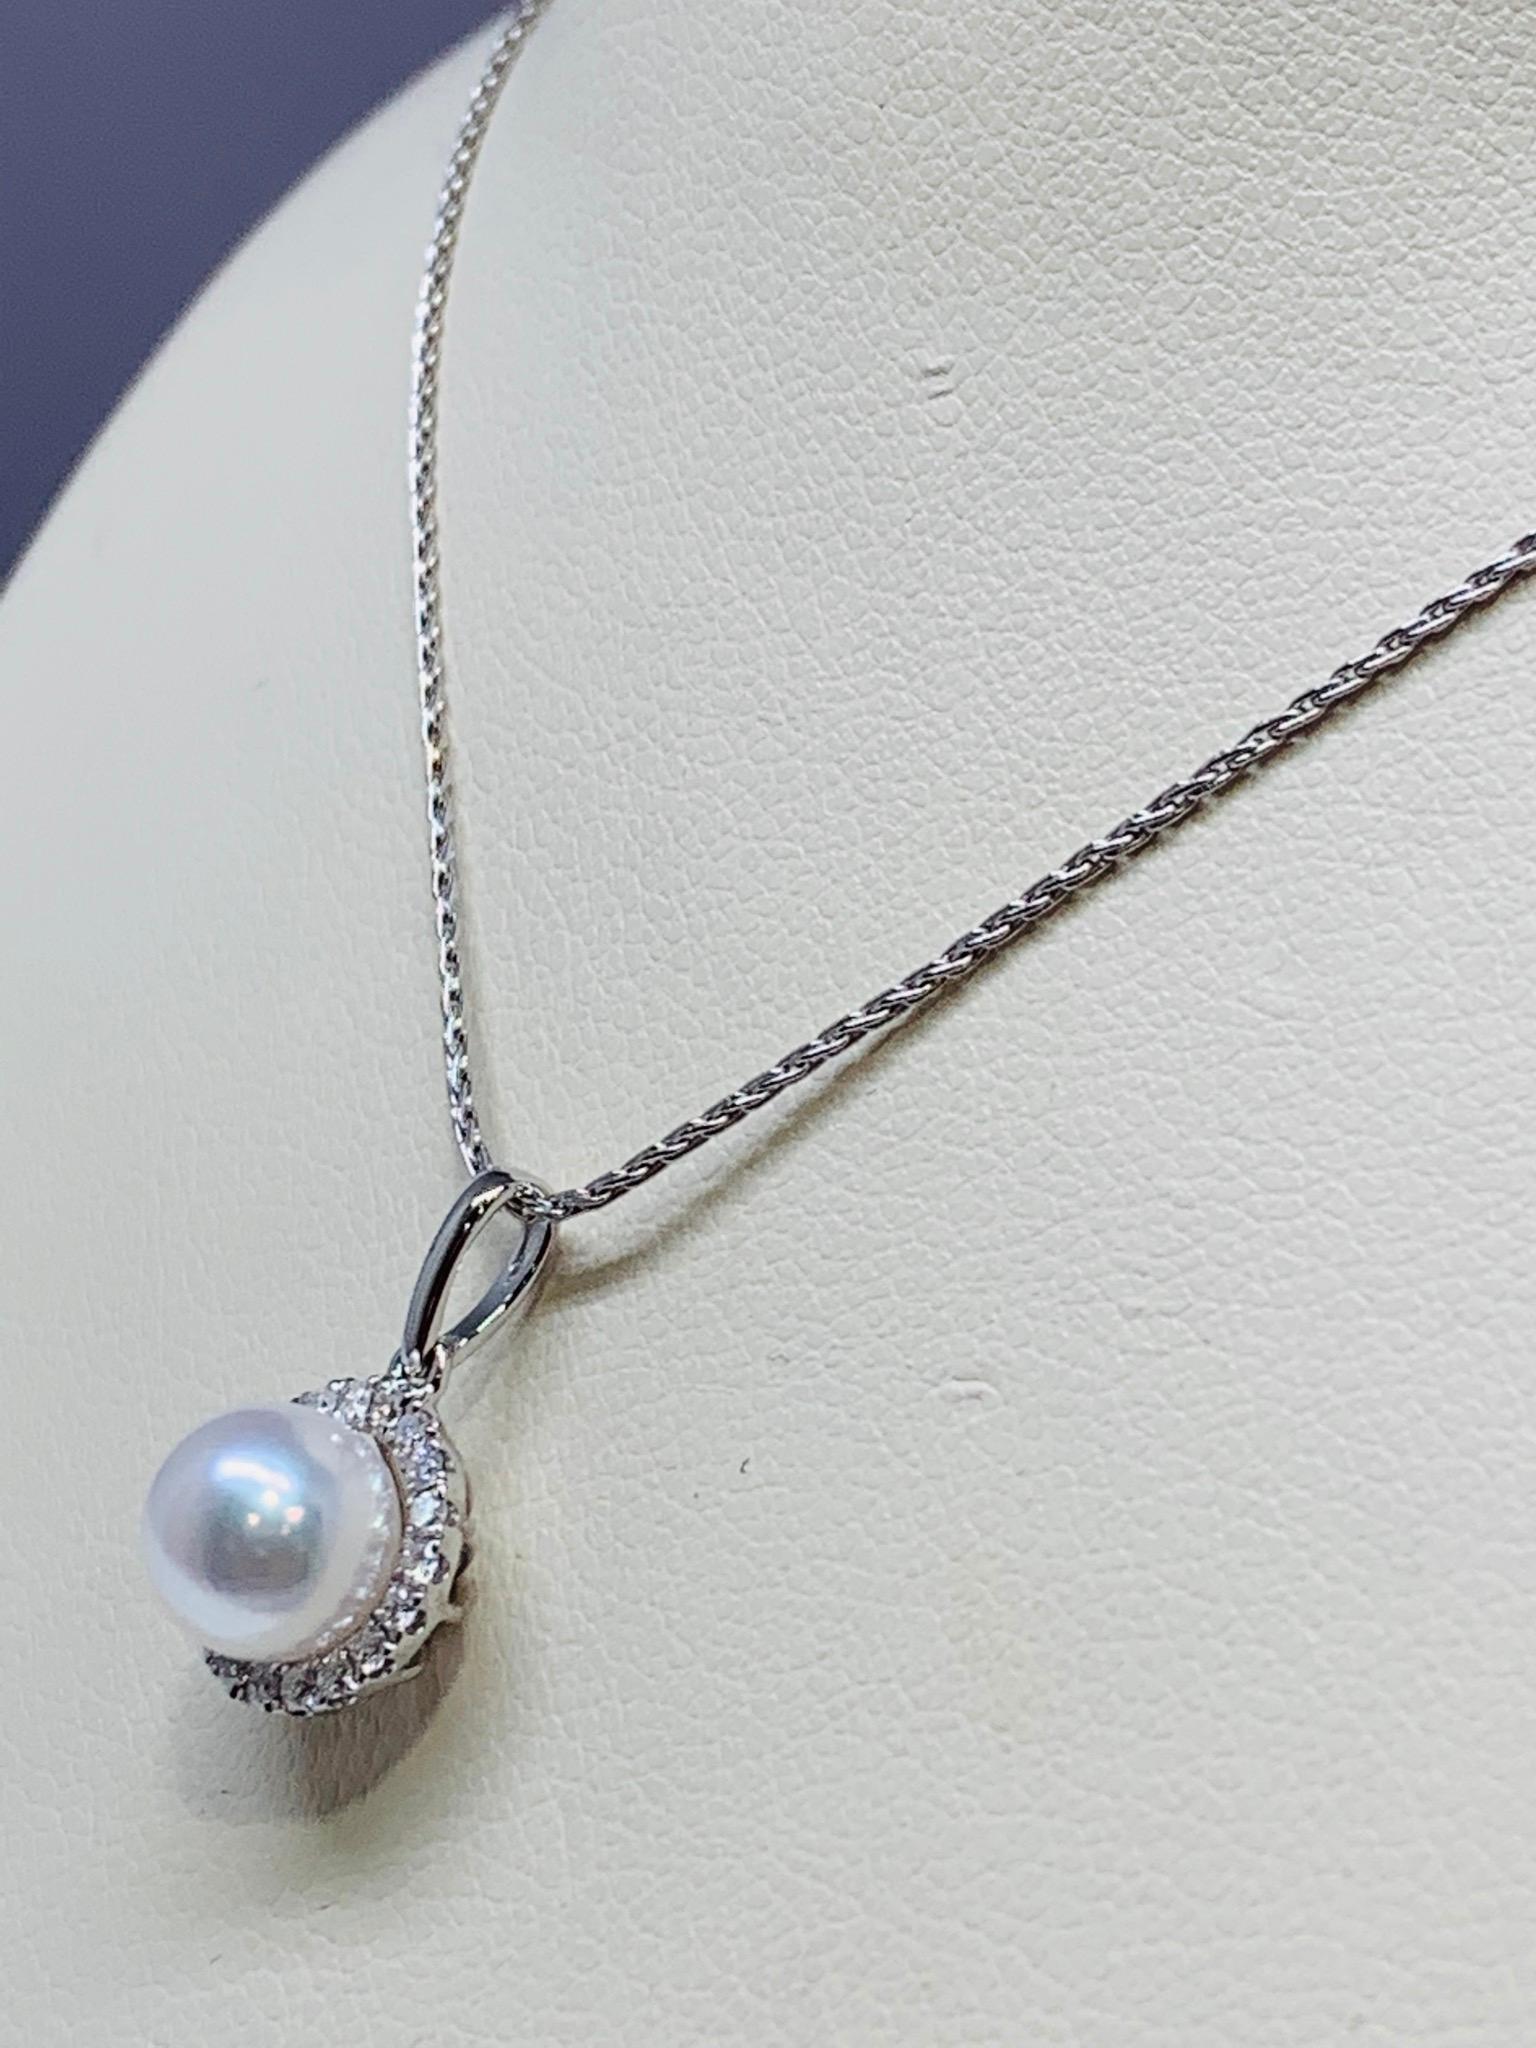 This timeless necklace features a 7.0 millimeter freshwater pearl set in a micro-pave diamond halo. This necklace holds 0.15 carats of round white diamonds surrounding the pearl. This necklace also includes a 0.8 millimeter white gold wheat style